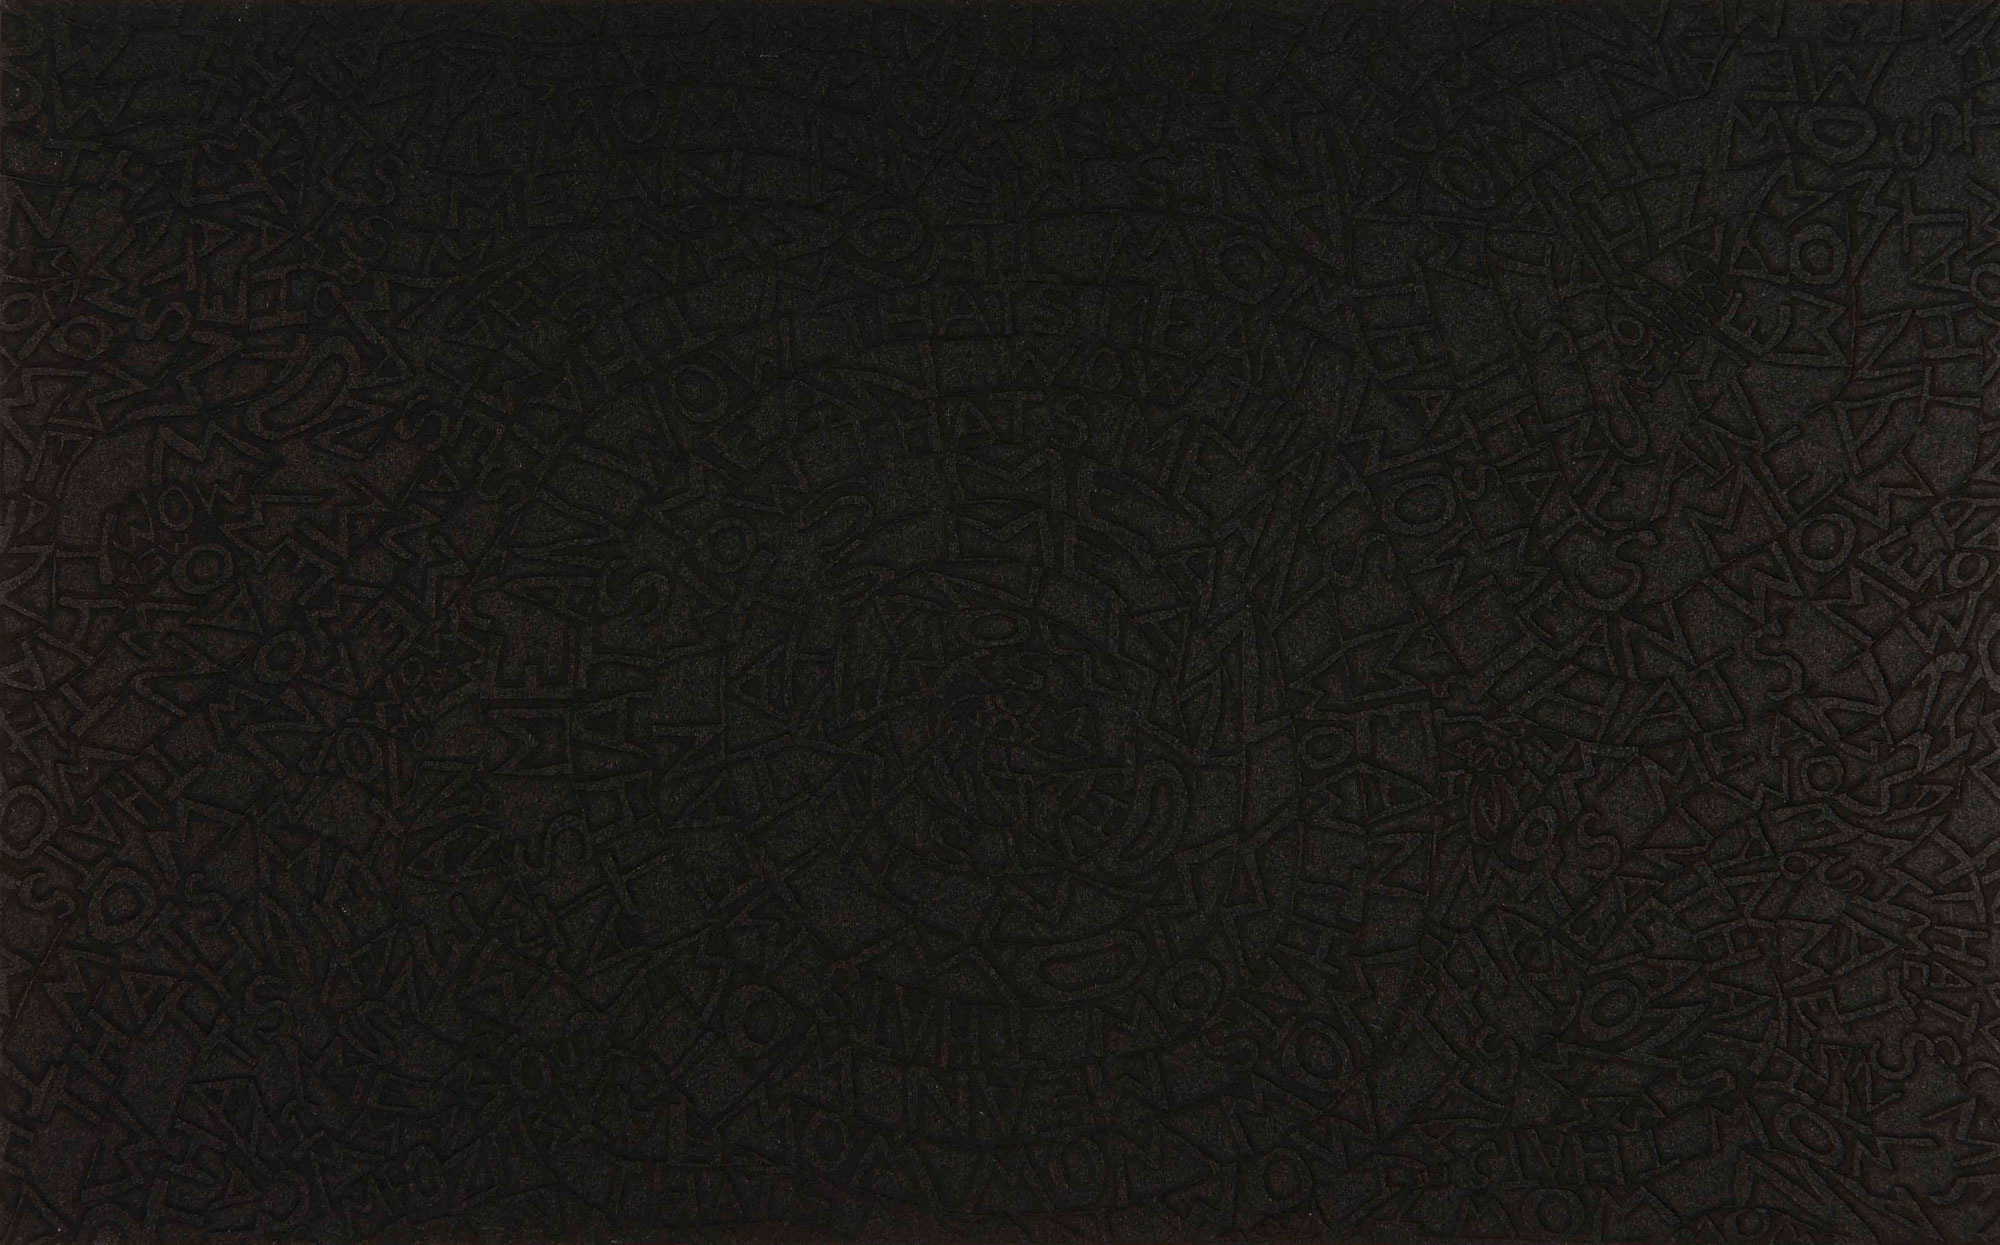 Trenton Doyle Hancock
Wow That's Mean, 2008
suite of four etchings on black paper with chine collé 
Each: 10-1/2 x 14 in.
Published by Graphicstudio, University of South Florida Collection